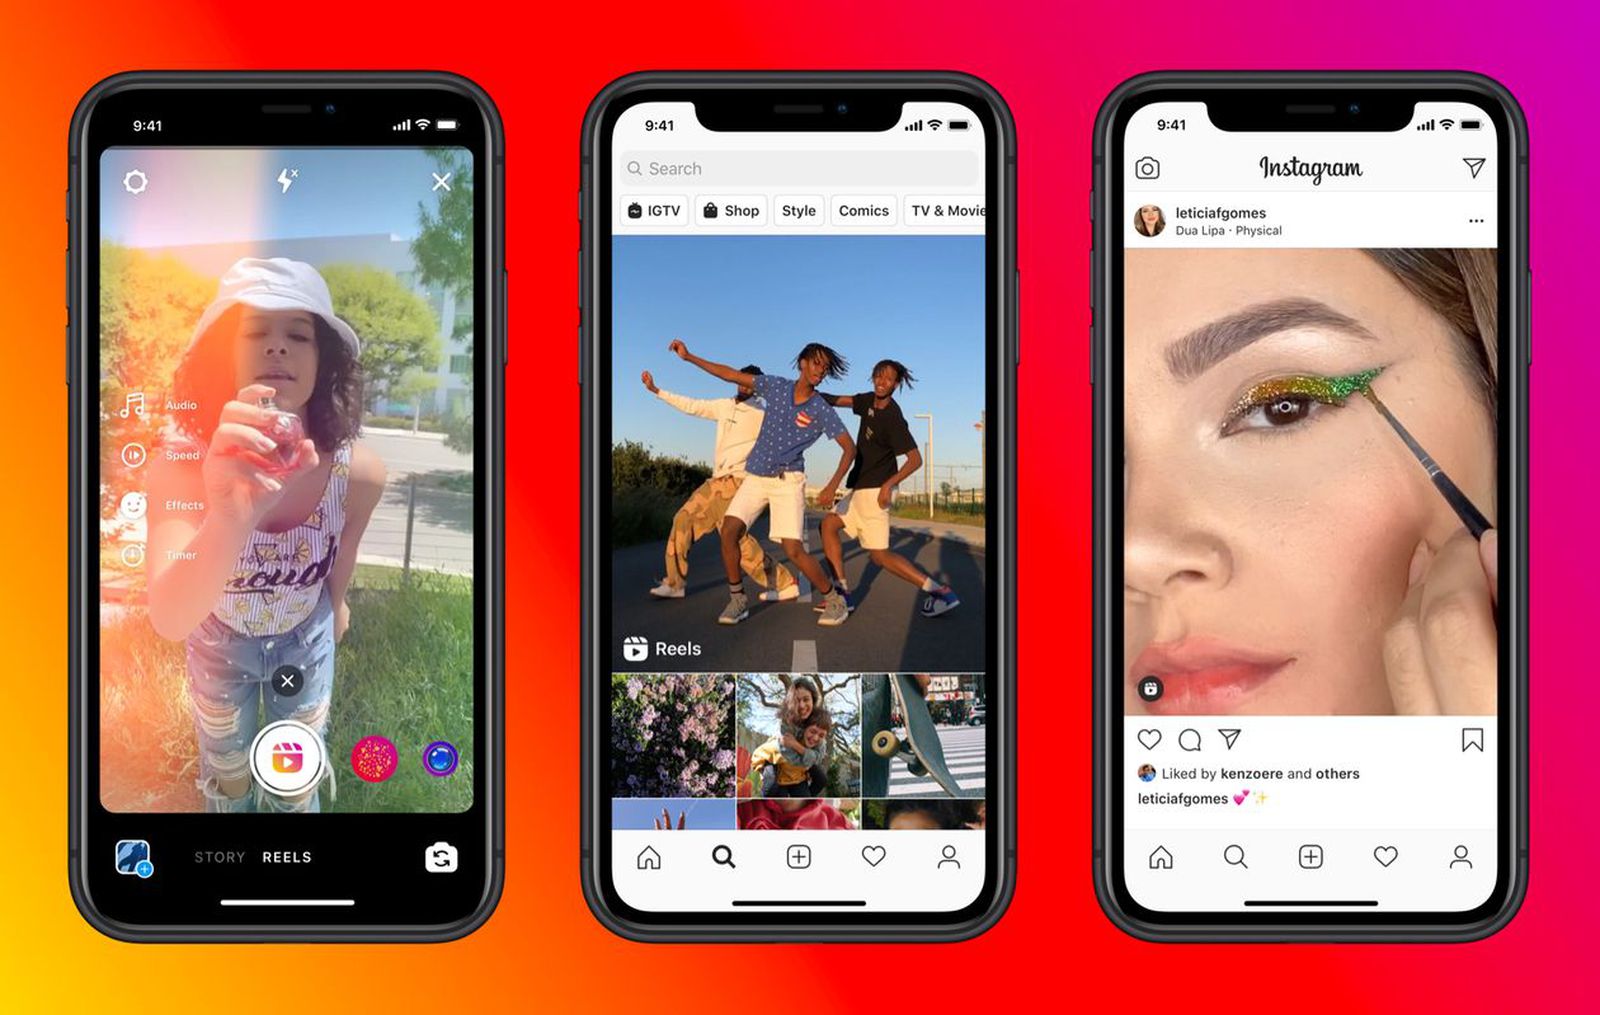 A Look at How Instagram's Algorithms Work for Stories, Feeds, Reels, and Explores